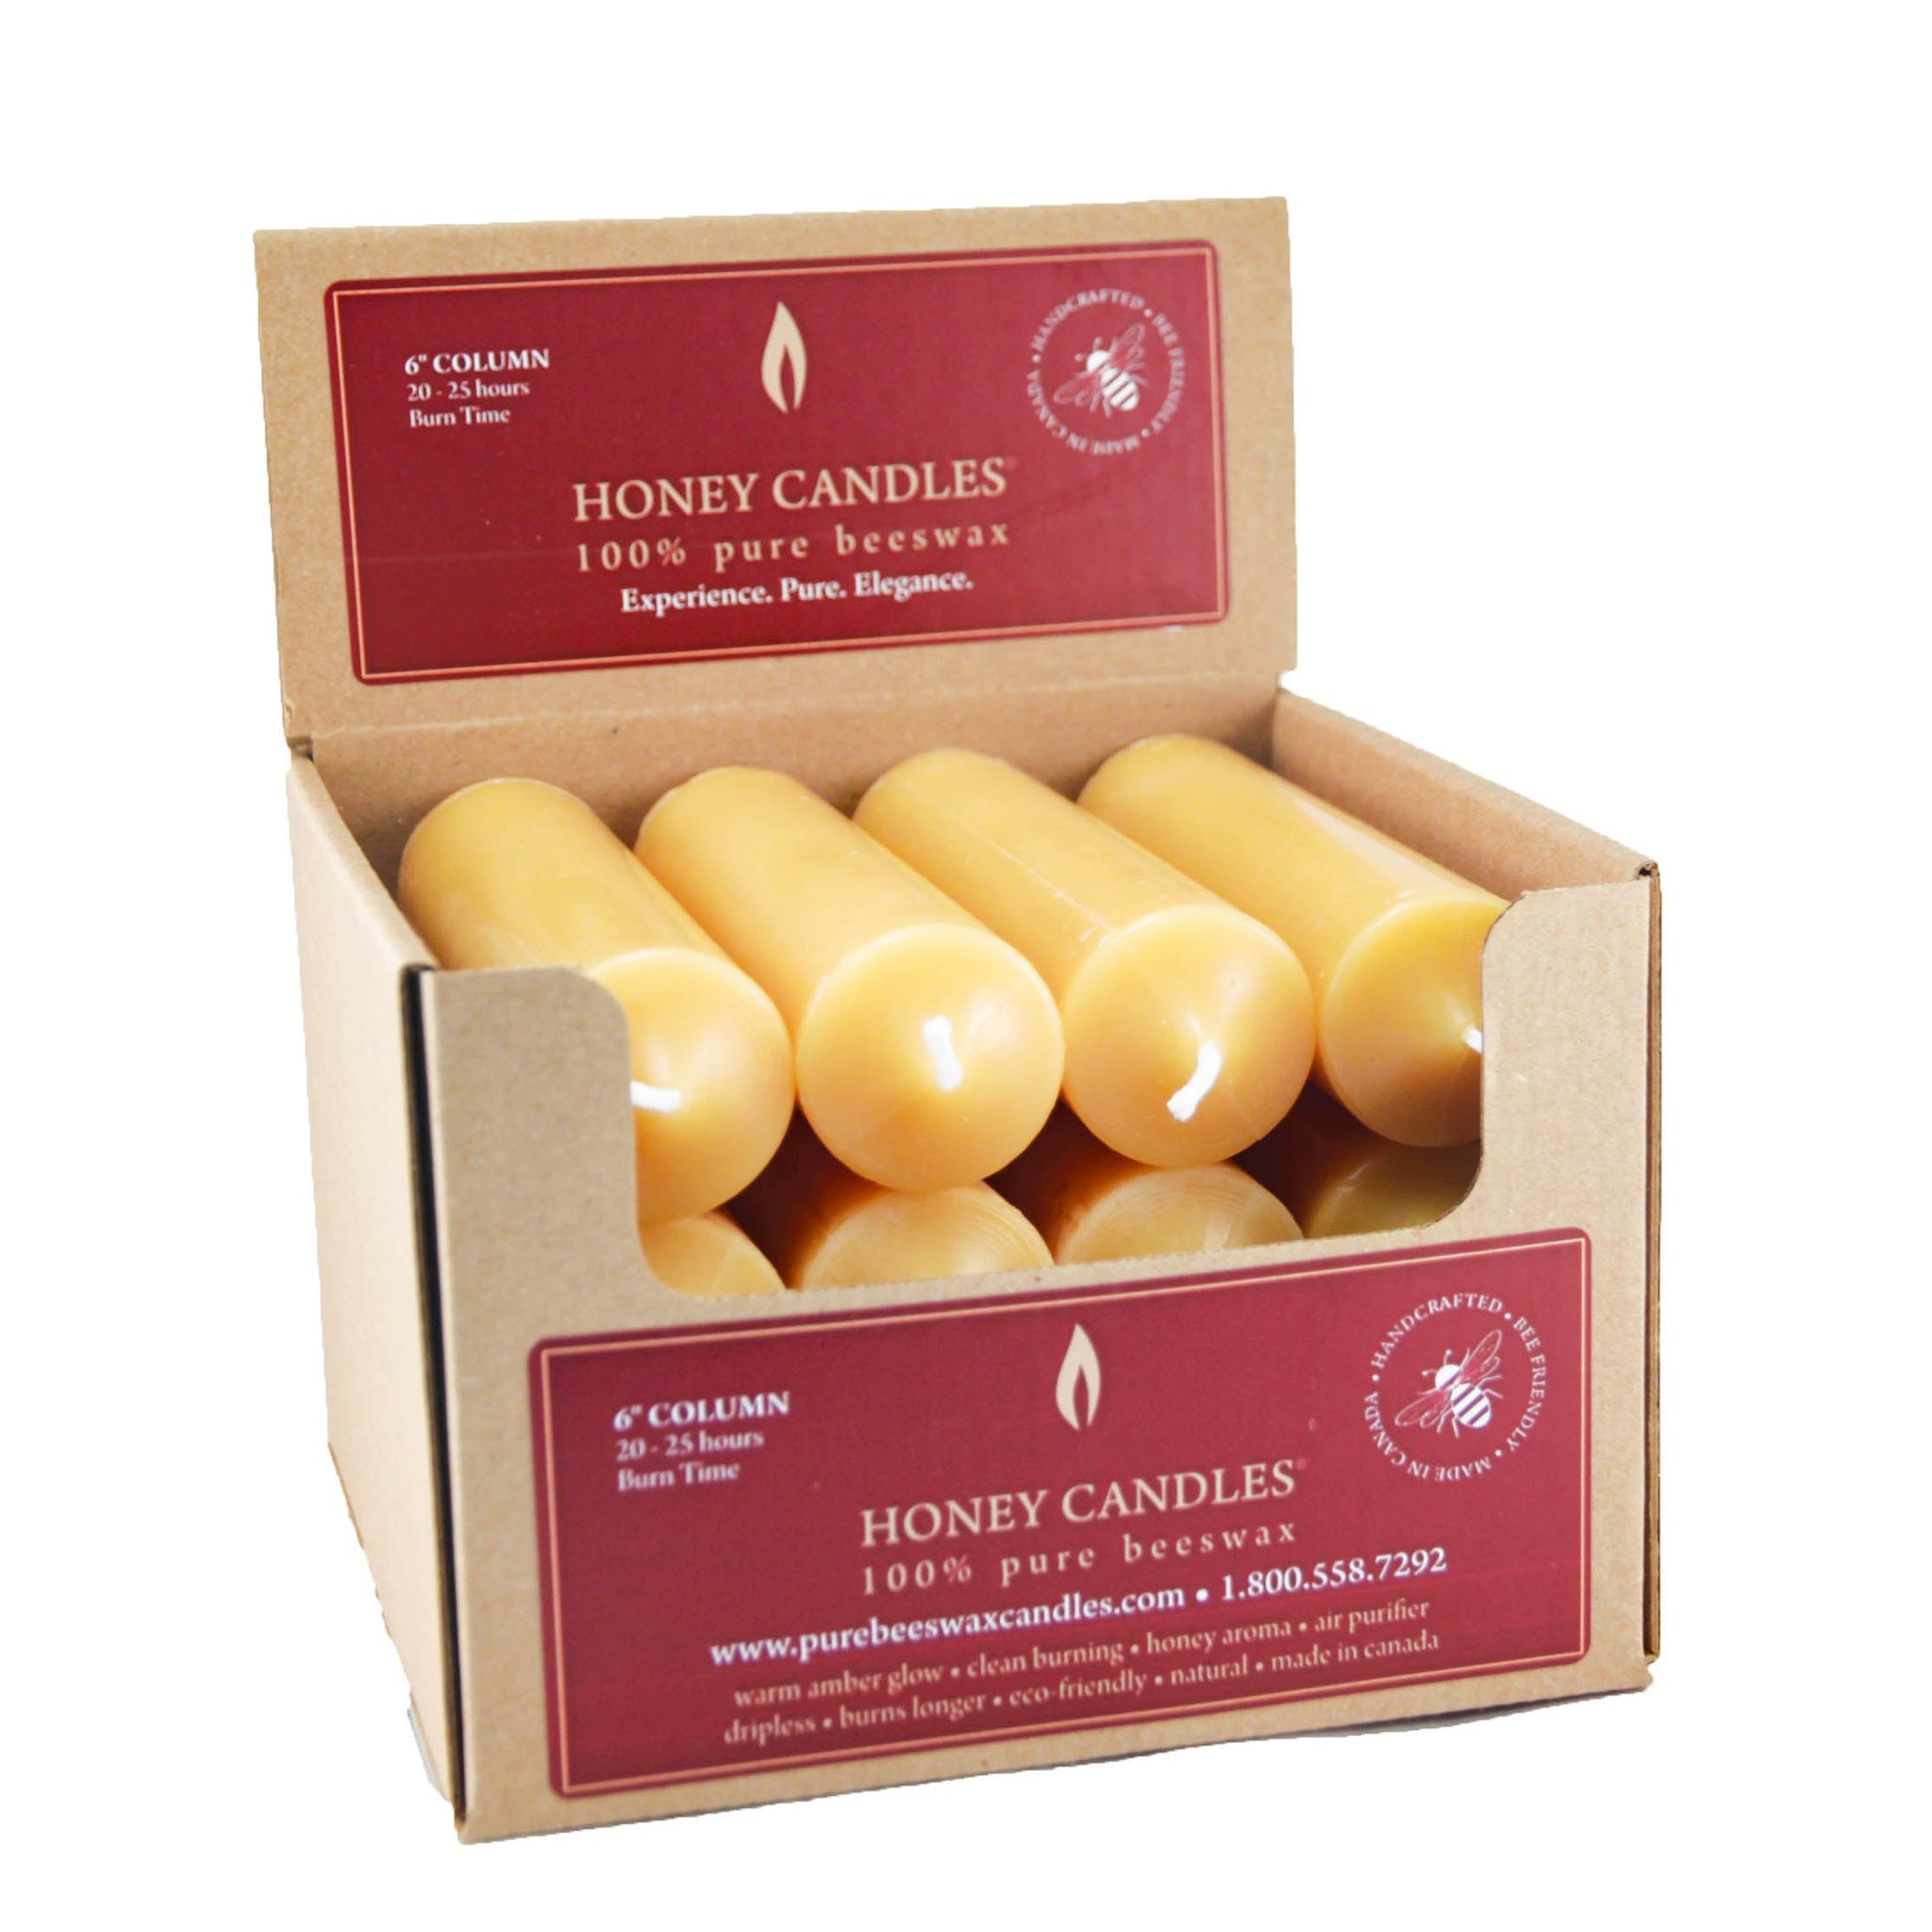 Honey Candles - 6" Natural Column Beeswax Candle